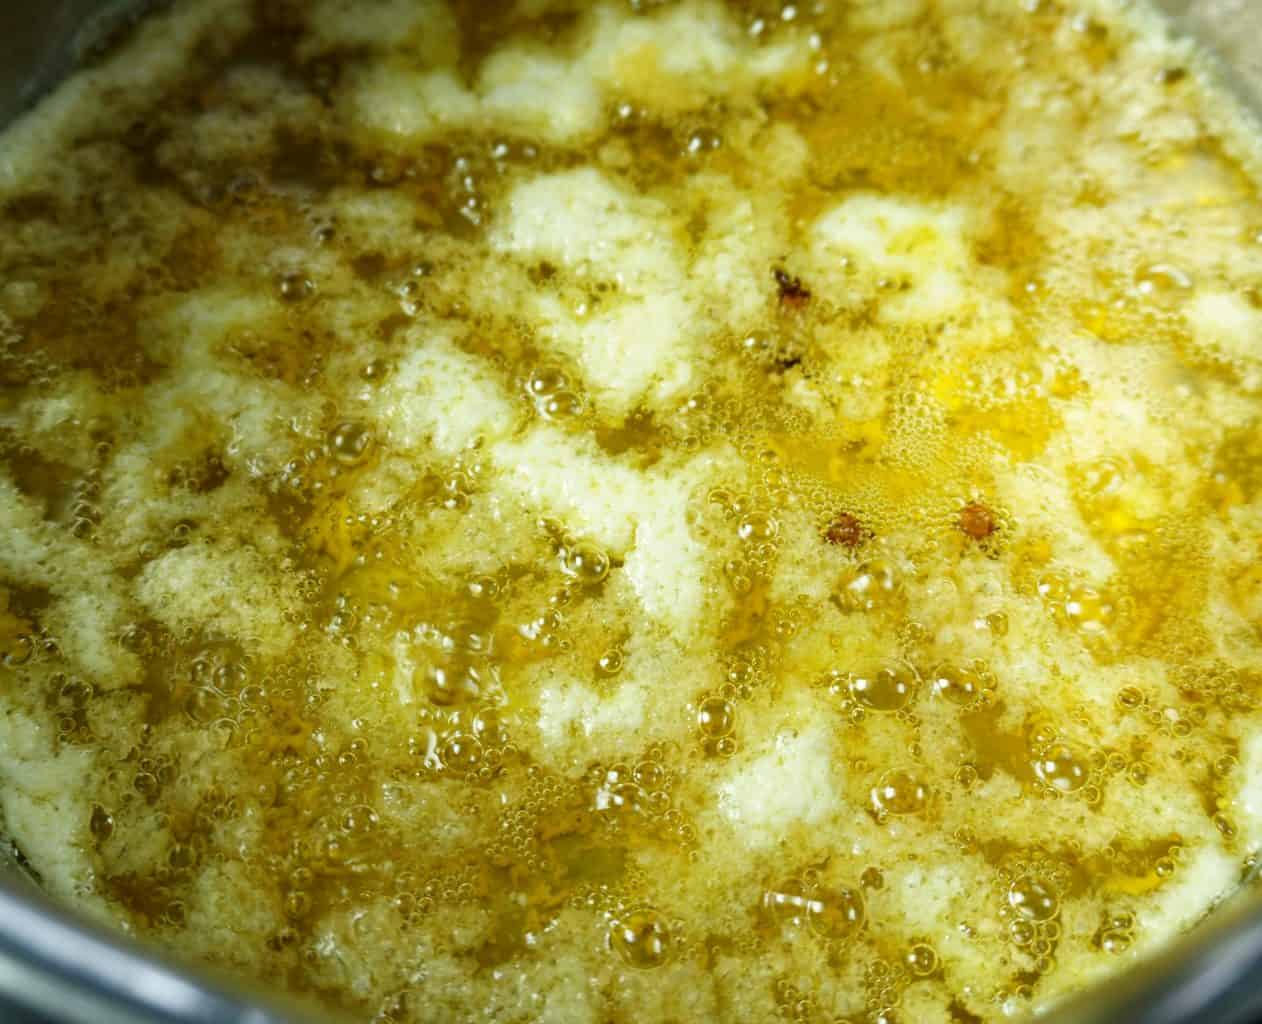 Clarified butter made to ghee